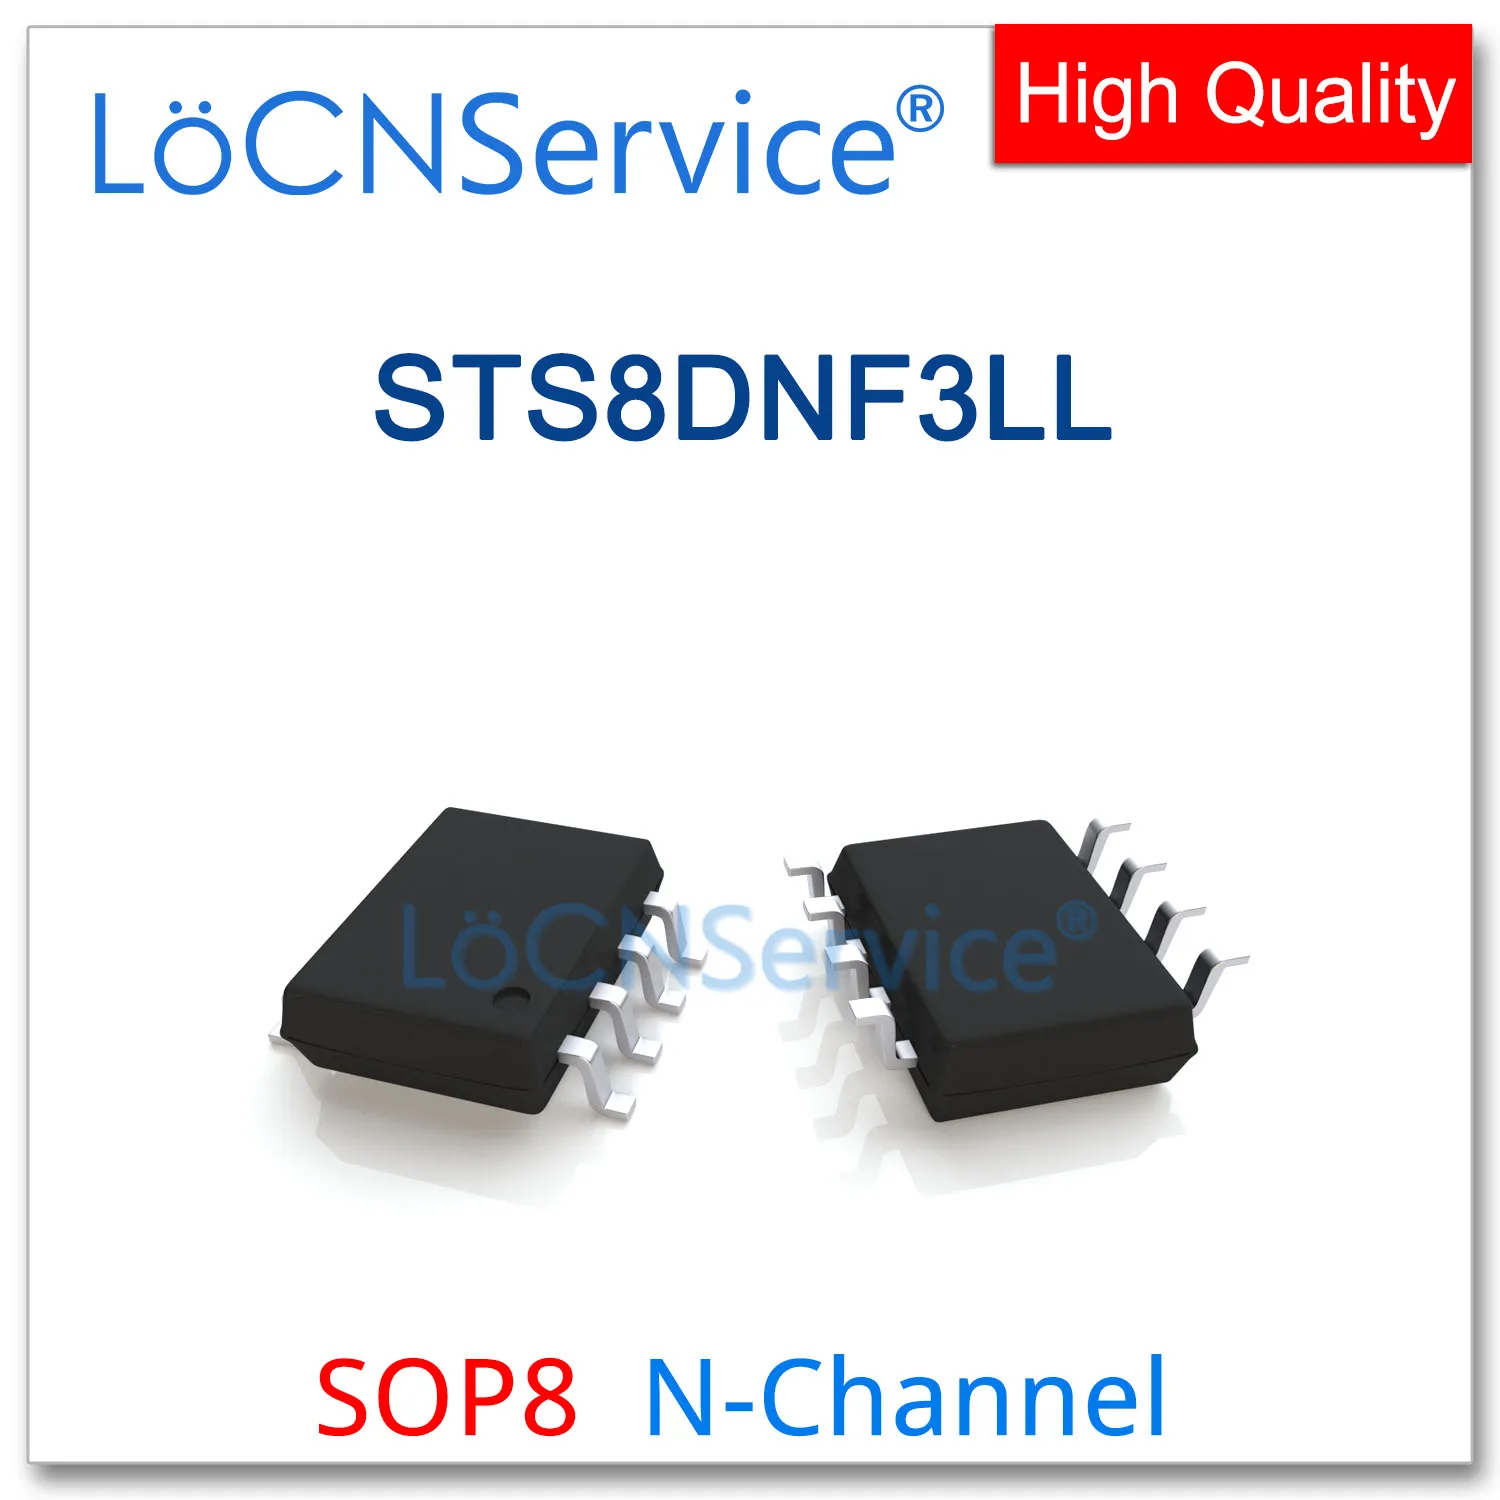 

LoCNService 50PCS 500PCS SOP8 STS8DNF3LL N-CHANNEL High quality STS